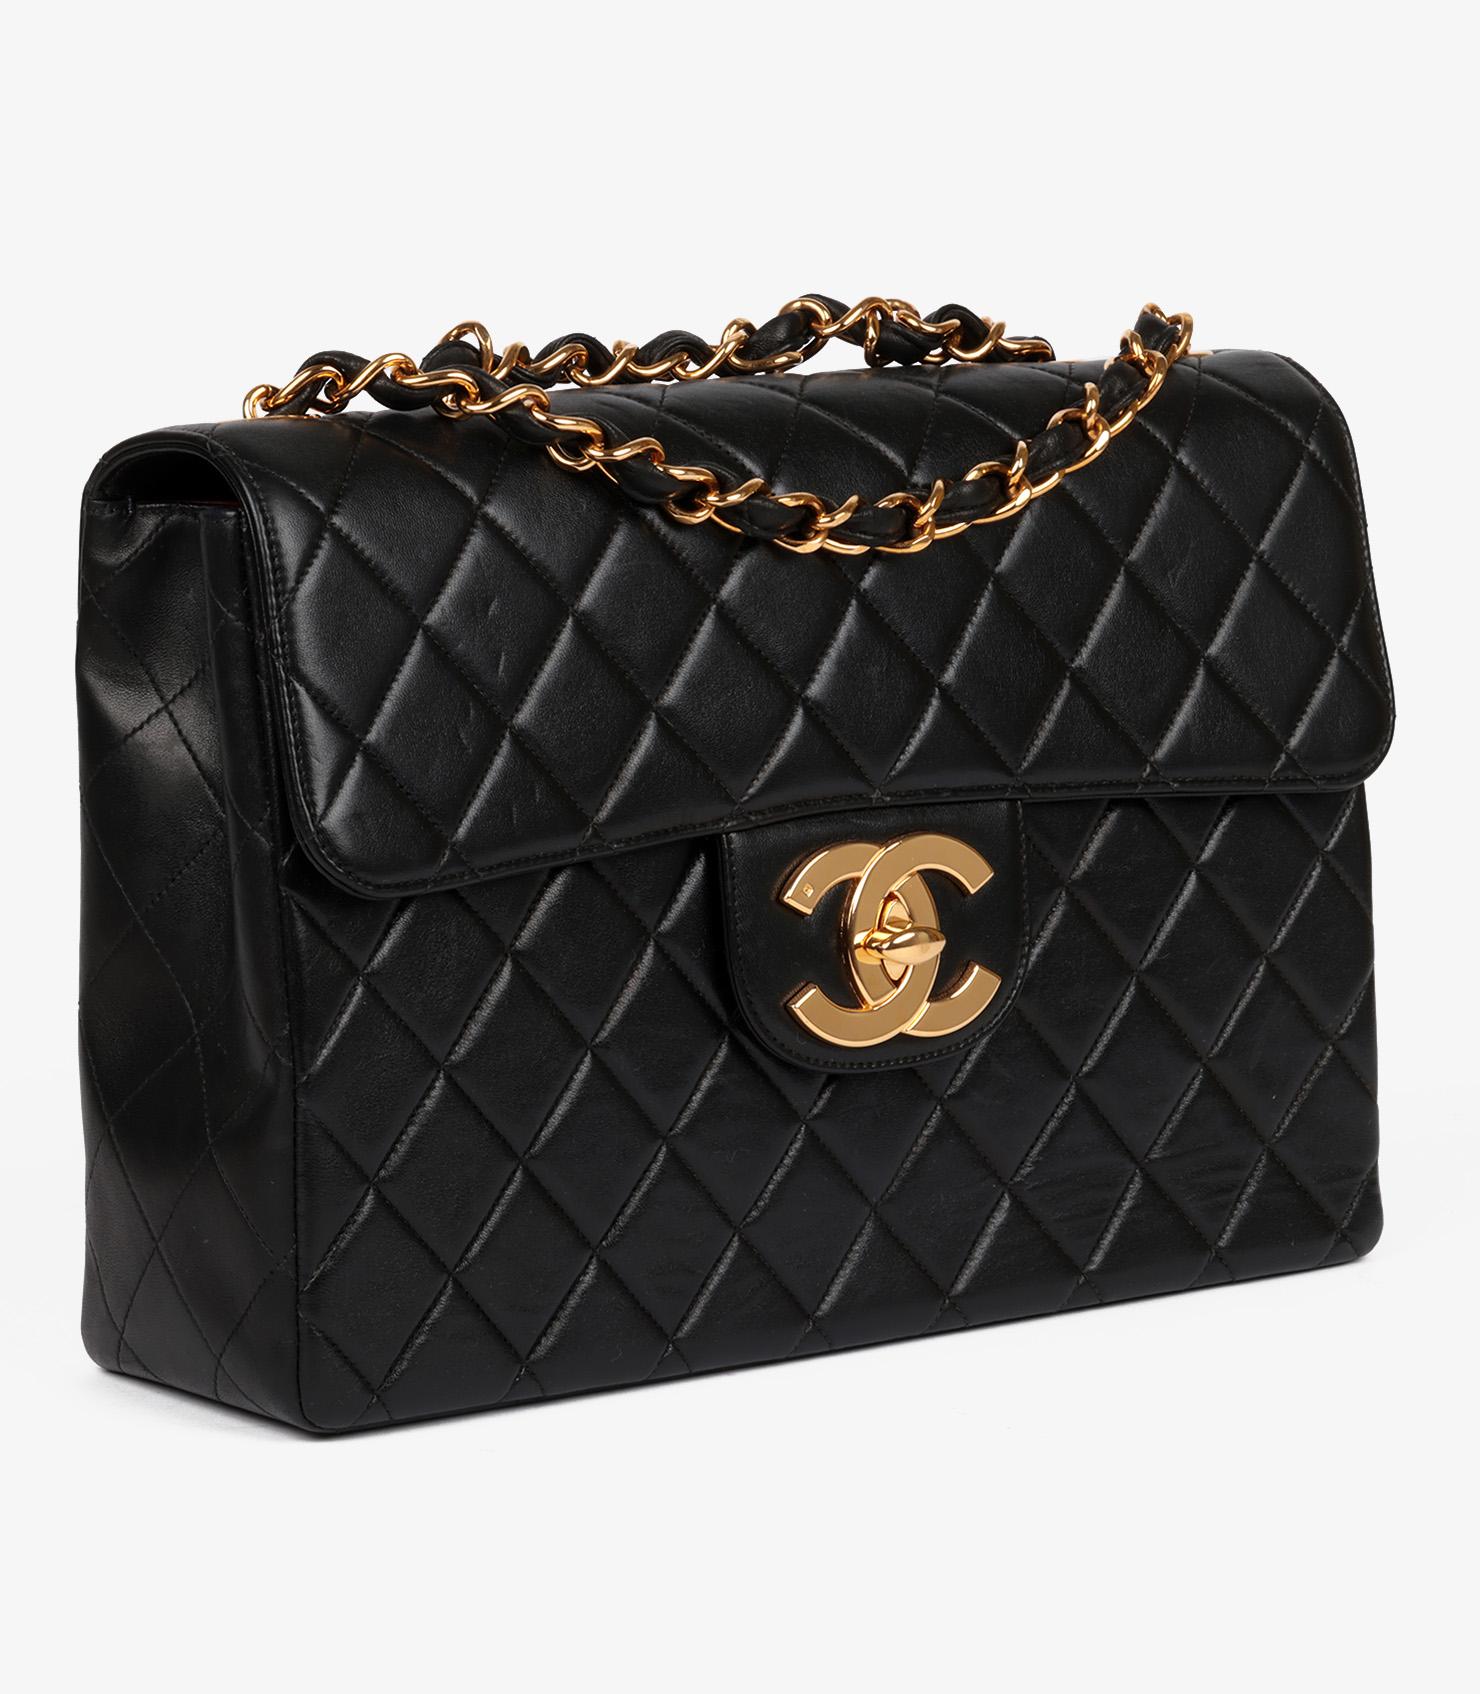 Chanel Black Quilted Lambskin Vintage Jumbo XL Classic Single Flap Bag In Excellent Condition For Sale In Bishop's Stortford, Hertfordshire